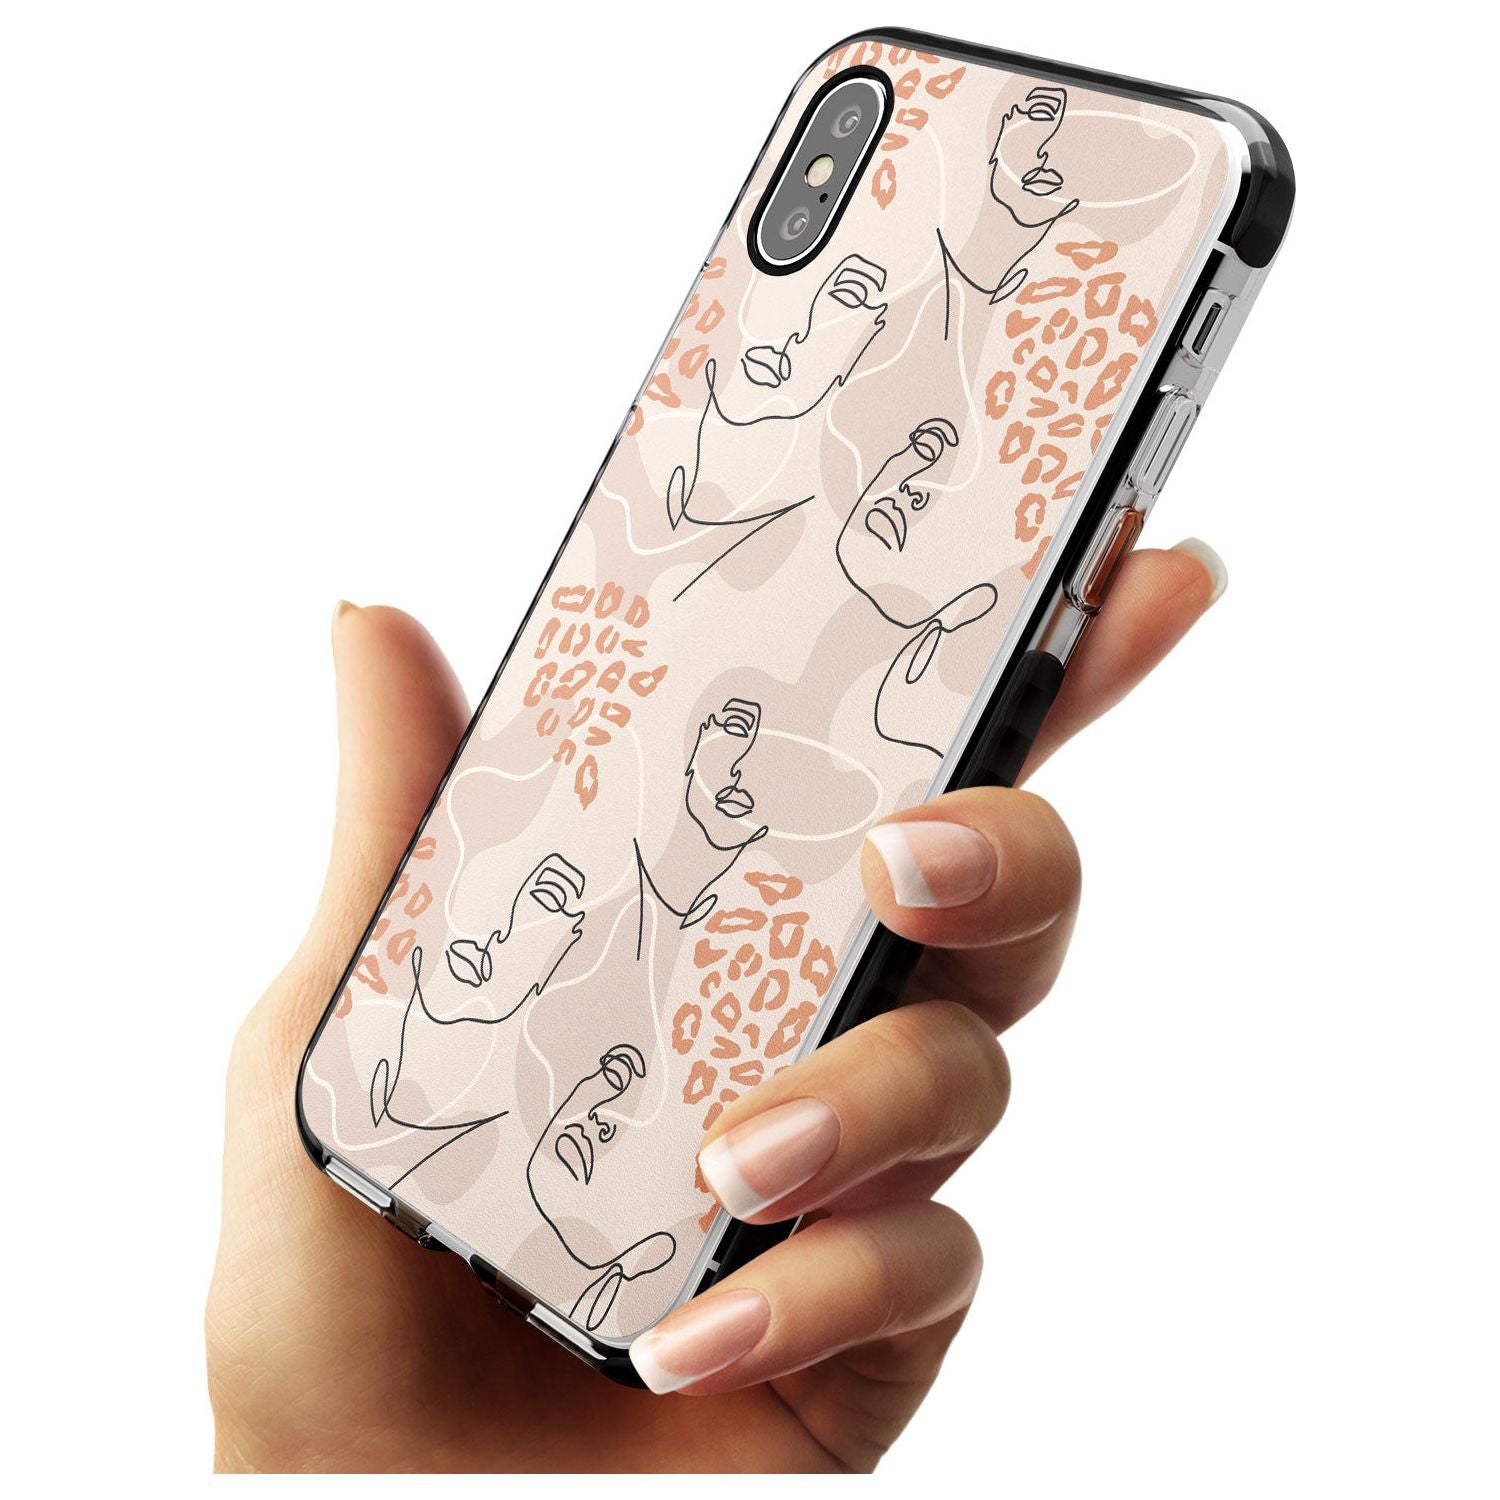 Leopard Print Stylish Abstract Faces Black Impact Phone Case for iPhone X XS Max XR